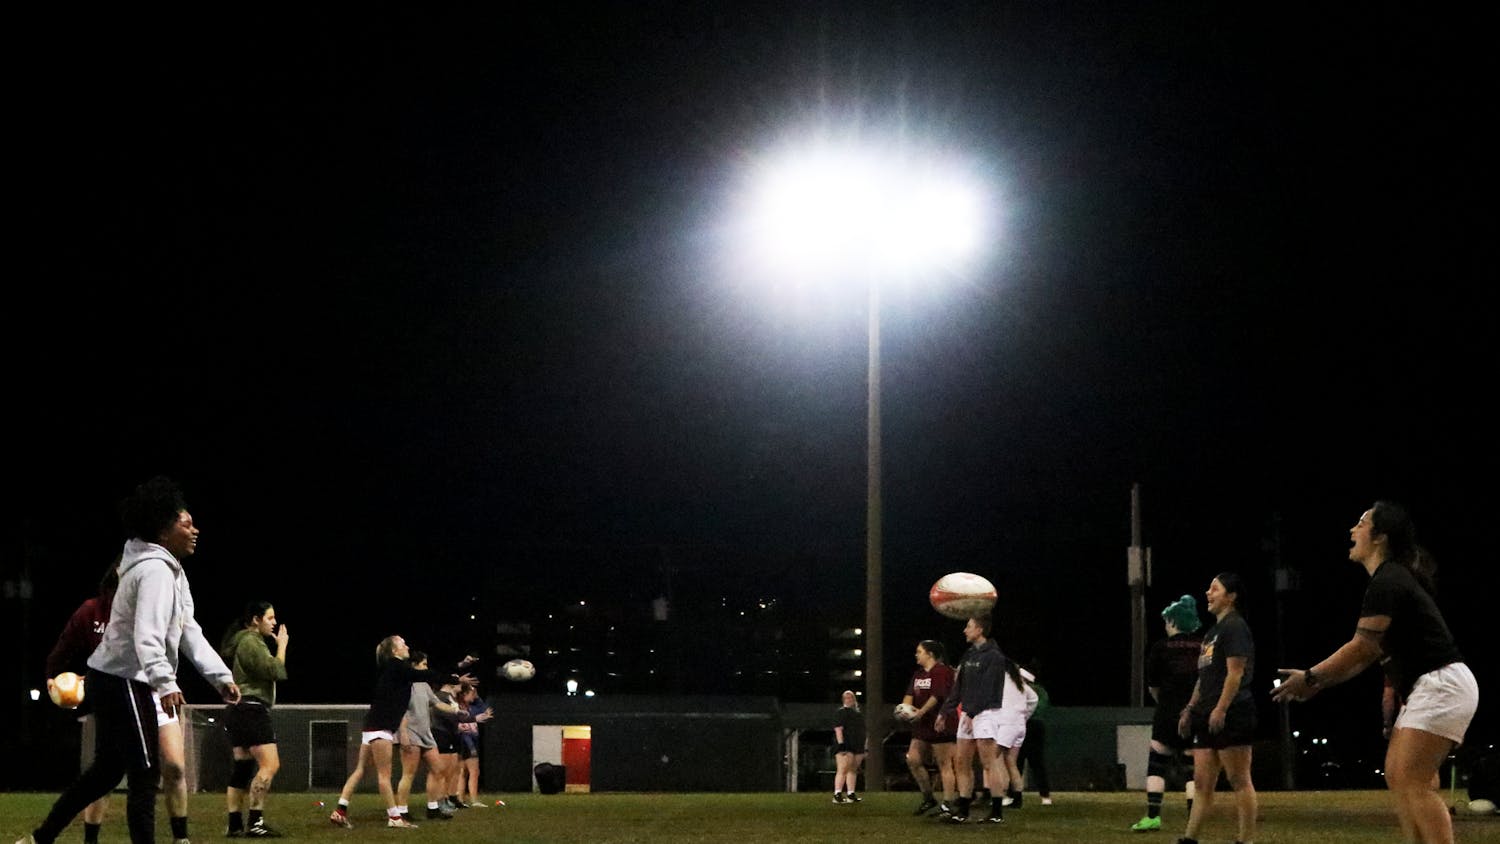 The Gamecocks women’s rugby team stretches and warms up for its Tuesday night practice at the Bluff Road Park practice fields on Feb. 7, 2023. The team has been preparing for its upcoming 2023 spring season since October 2022.